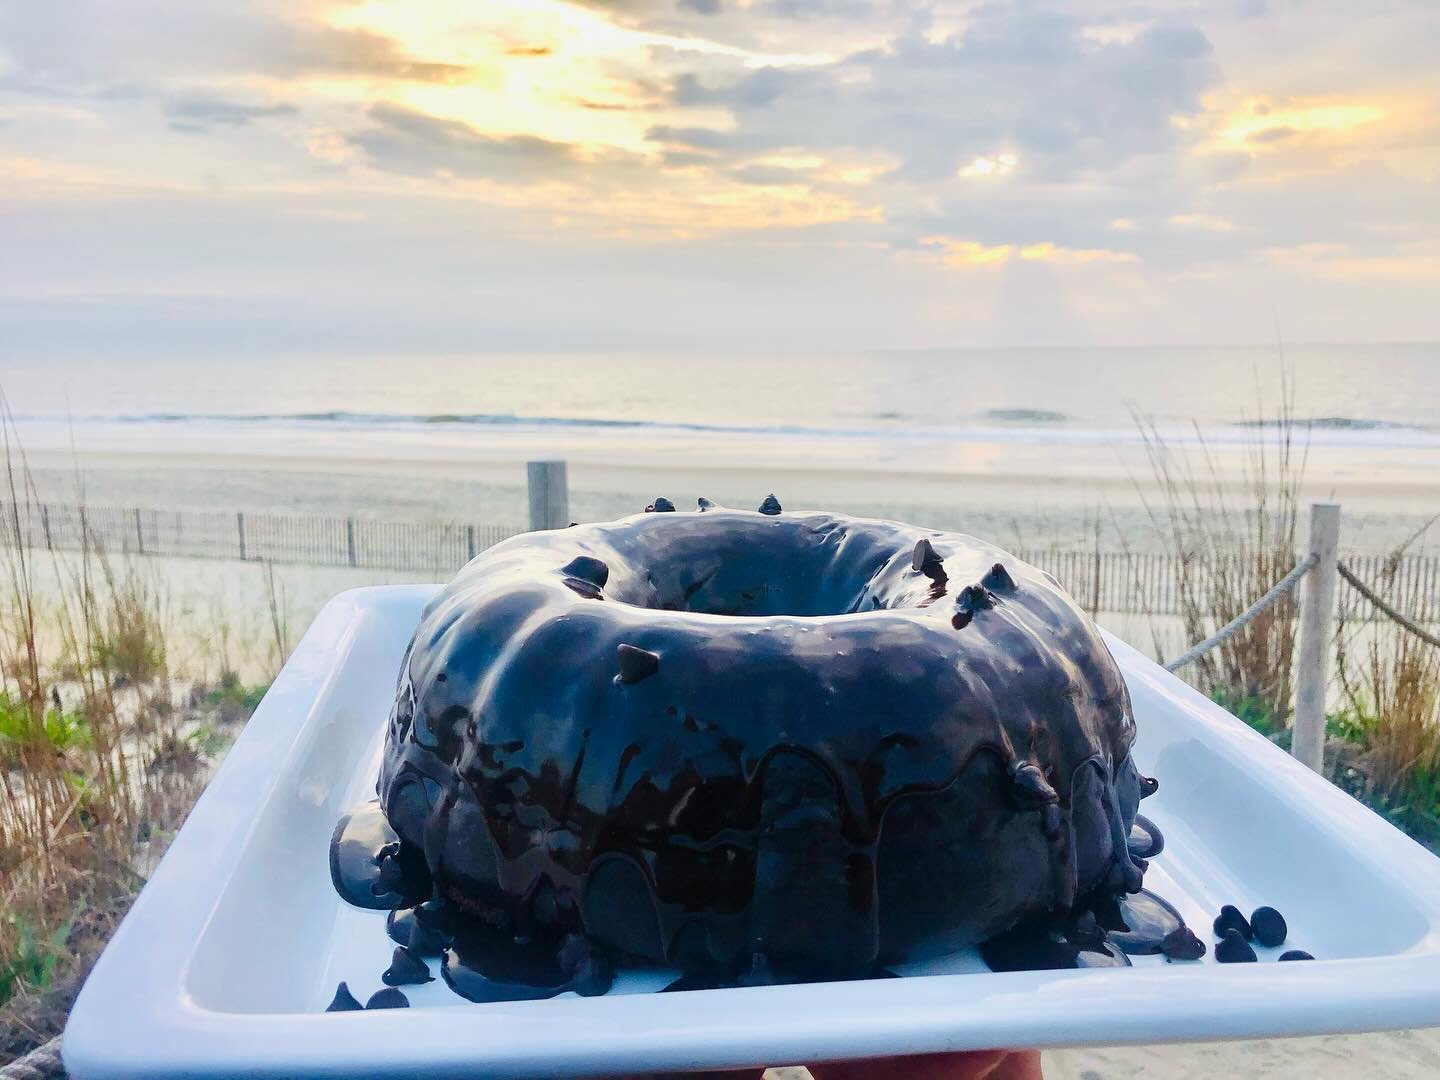 Our famous Whole Darn Good Chocolate Cake. Rich Cake with Chocolate Ganache Topping. Made in house. Available for purchase via our website and for pick-up only at Sedona between 5:00pm - 7:00pm. Our address is 26 N Pennsylvania Ave Bethany Beach, DE 